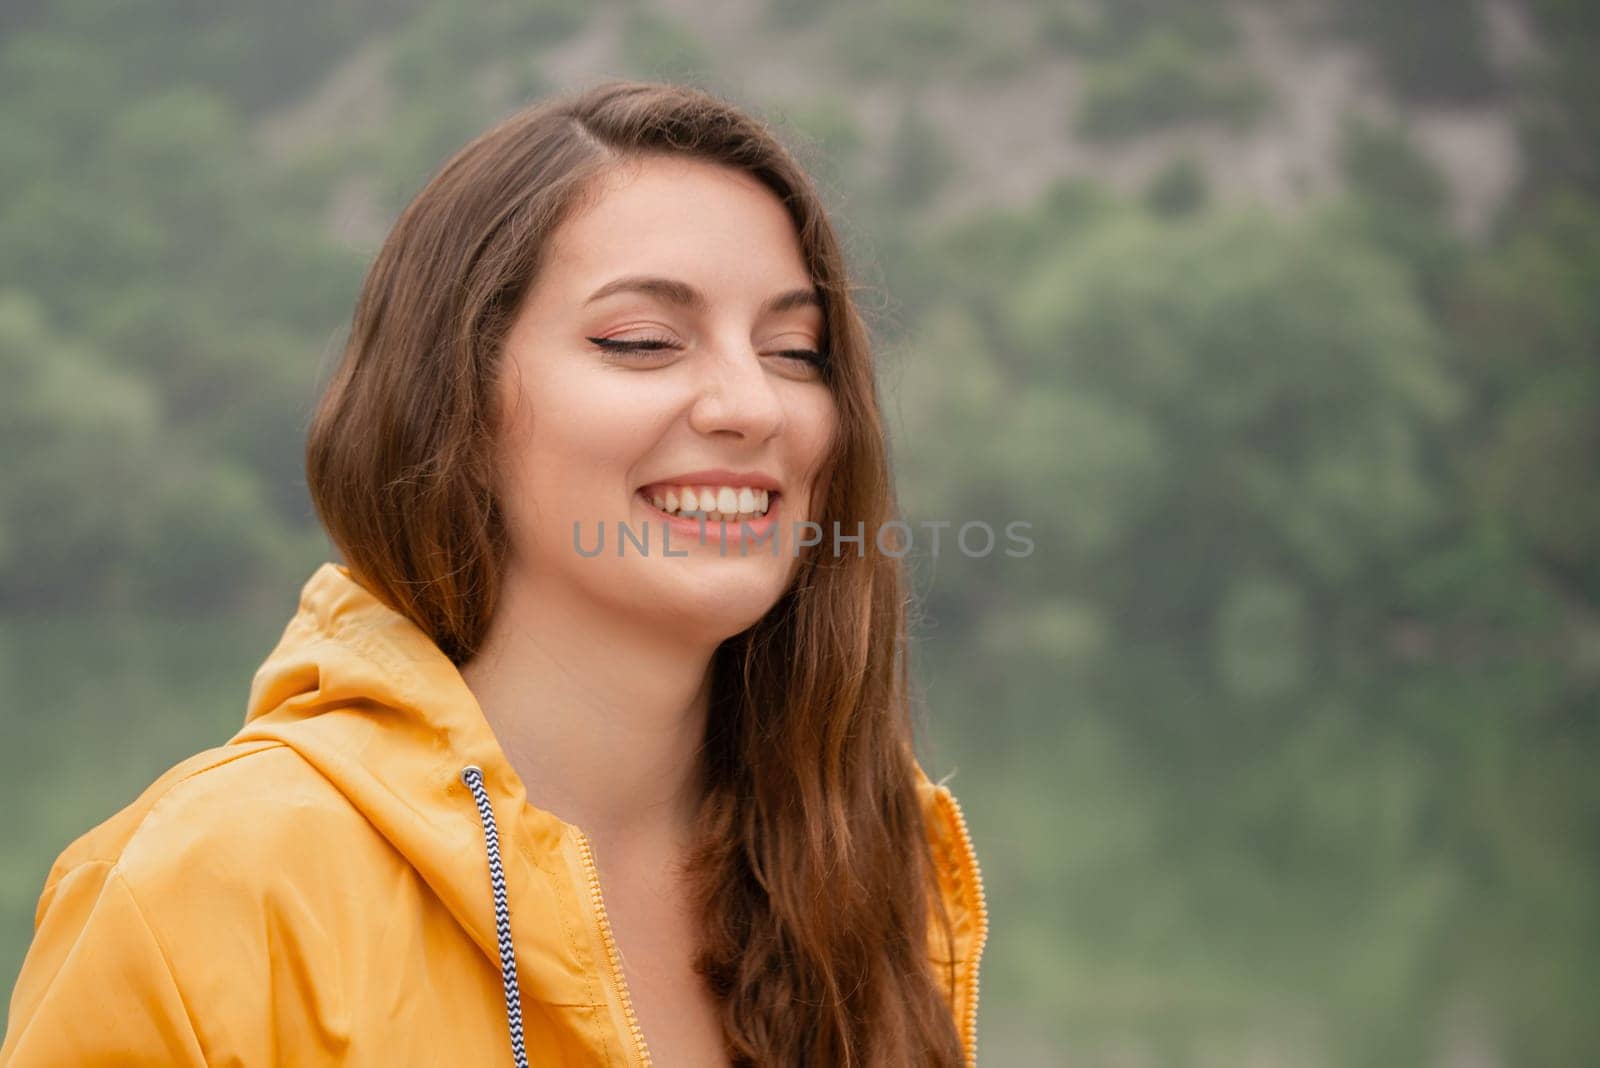 A woman in a yellow jacket is smiling and looking at the camera. The image has a bright and cheerful mood, with the woman's smile and the yellow jacket adding to the overall positive atmosphere